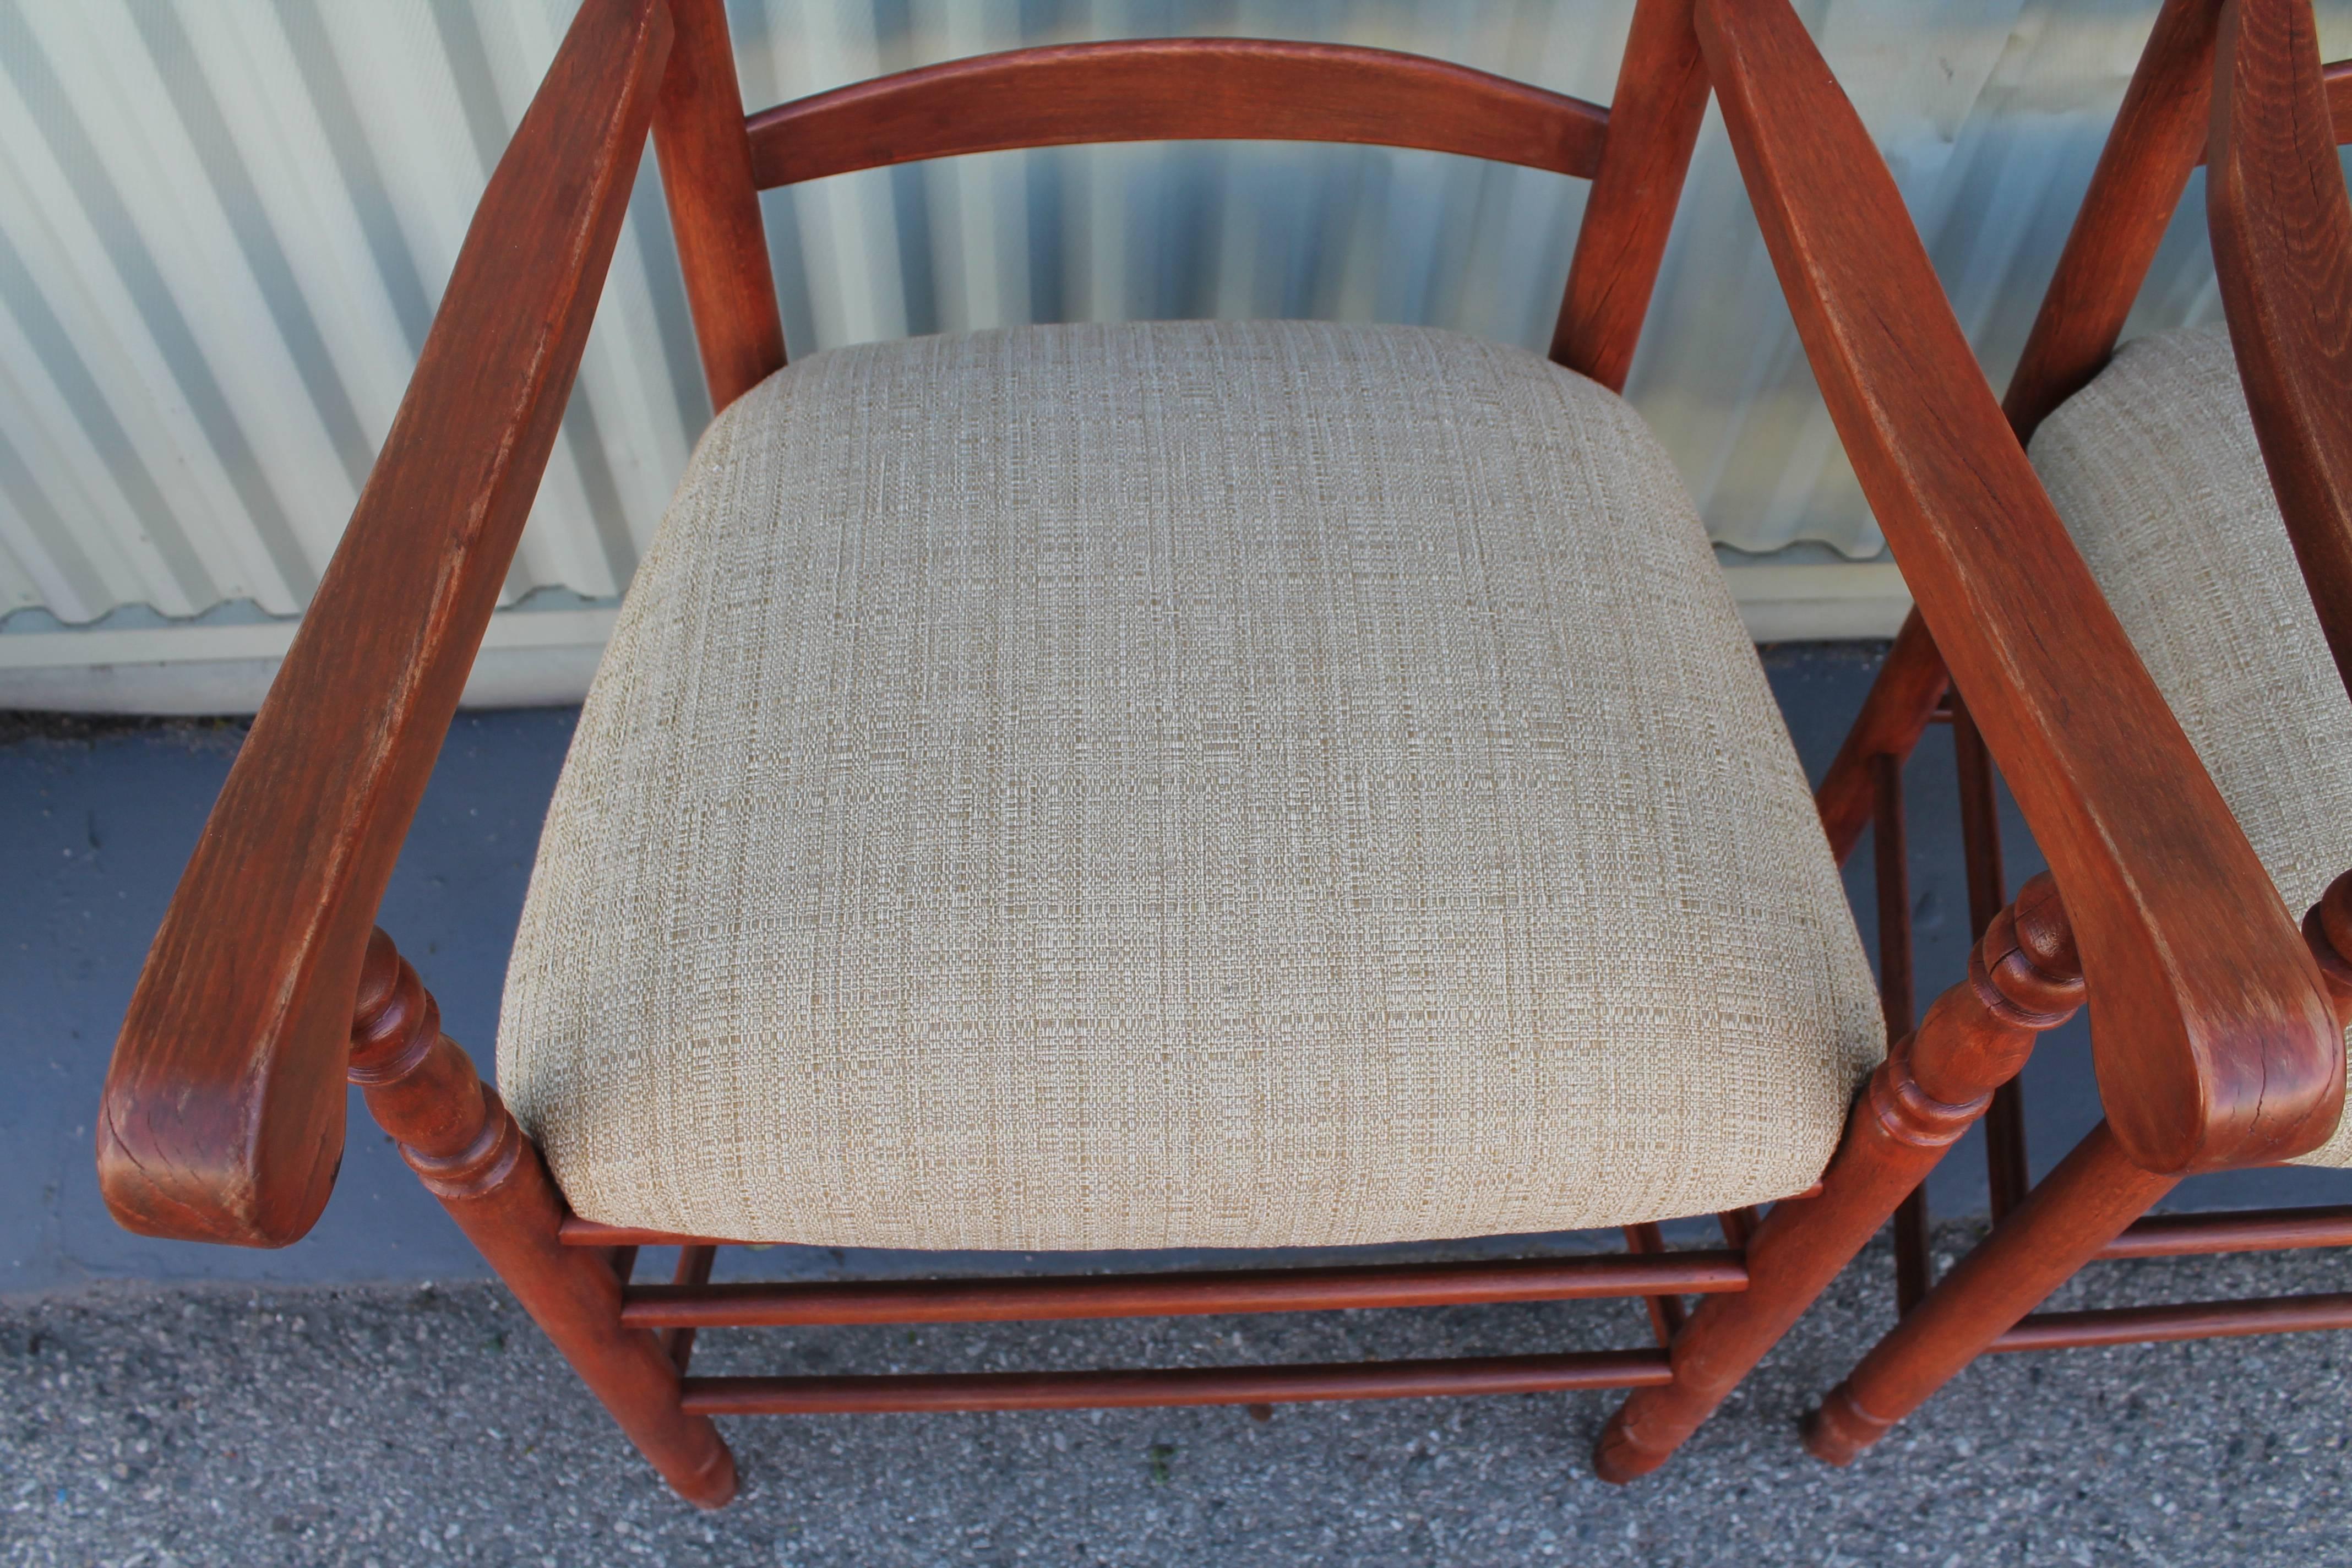 This is the most amazing matching pair of red painted ladder back arm chairs from New England. The seats are newly upholstered in a tan durable linen. The chairs are very strong and sturdy. They are super comfortable. The chairs have a amazing